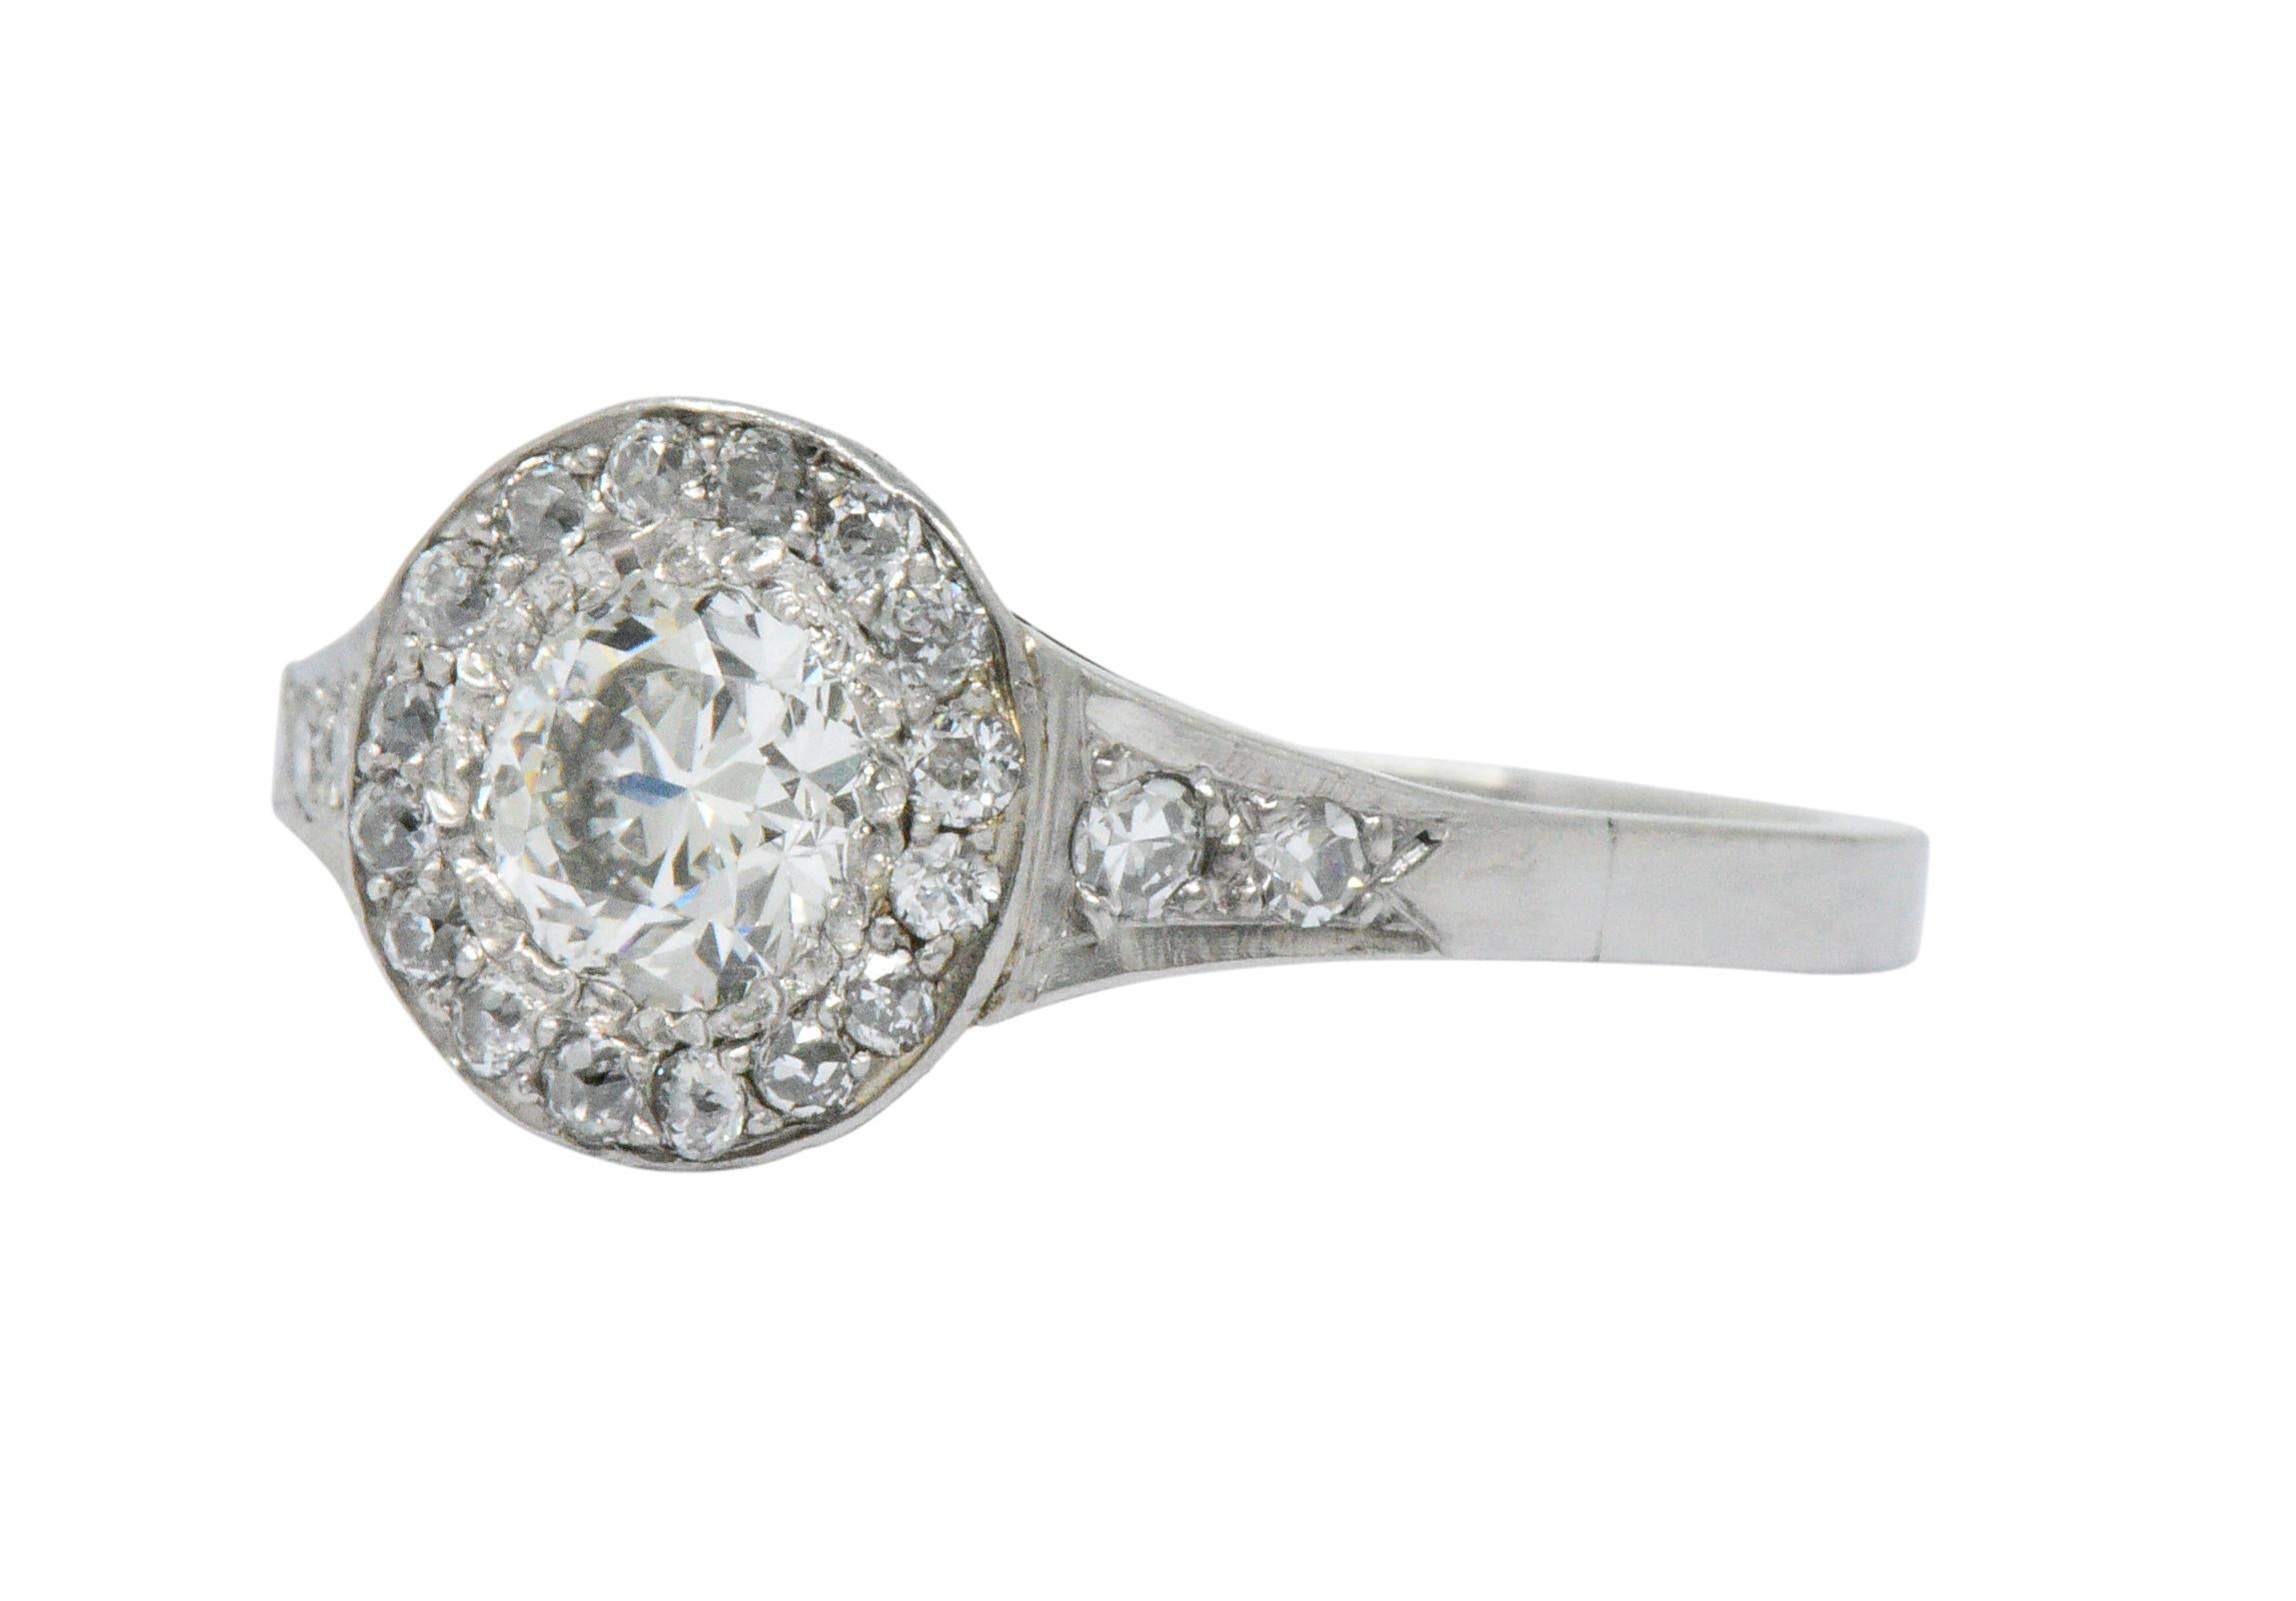 Centering an old European cut diamond weighing approximately 0.75 carat, I color with VS clarity

Surrounded by a circular halo of old European cut diamonds and flanked by shoulders bead set with single cut diamonds

Accent diamond weight weighs